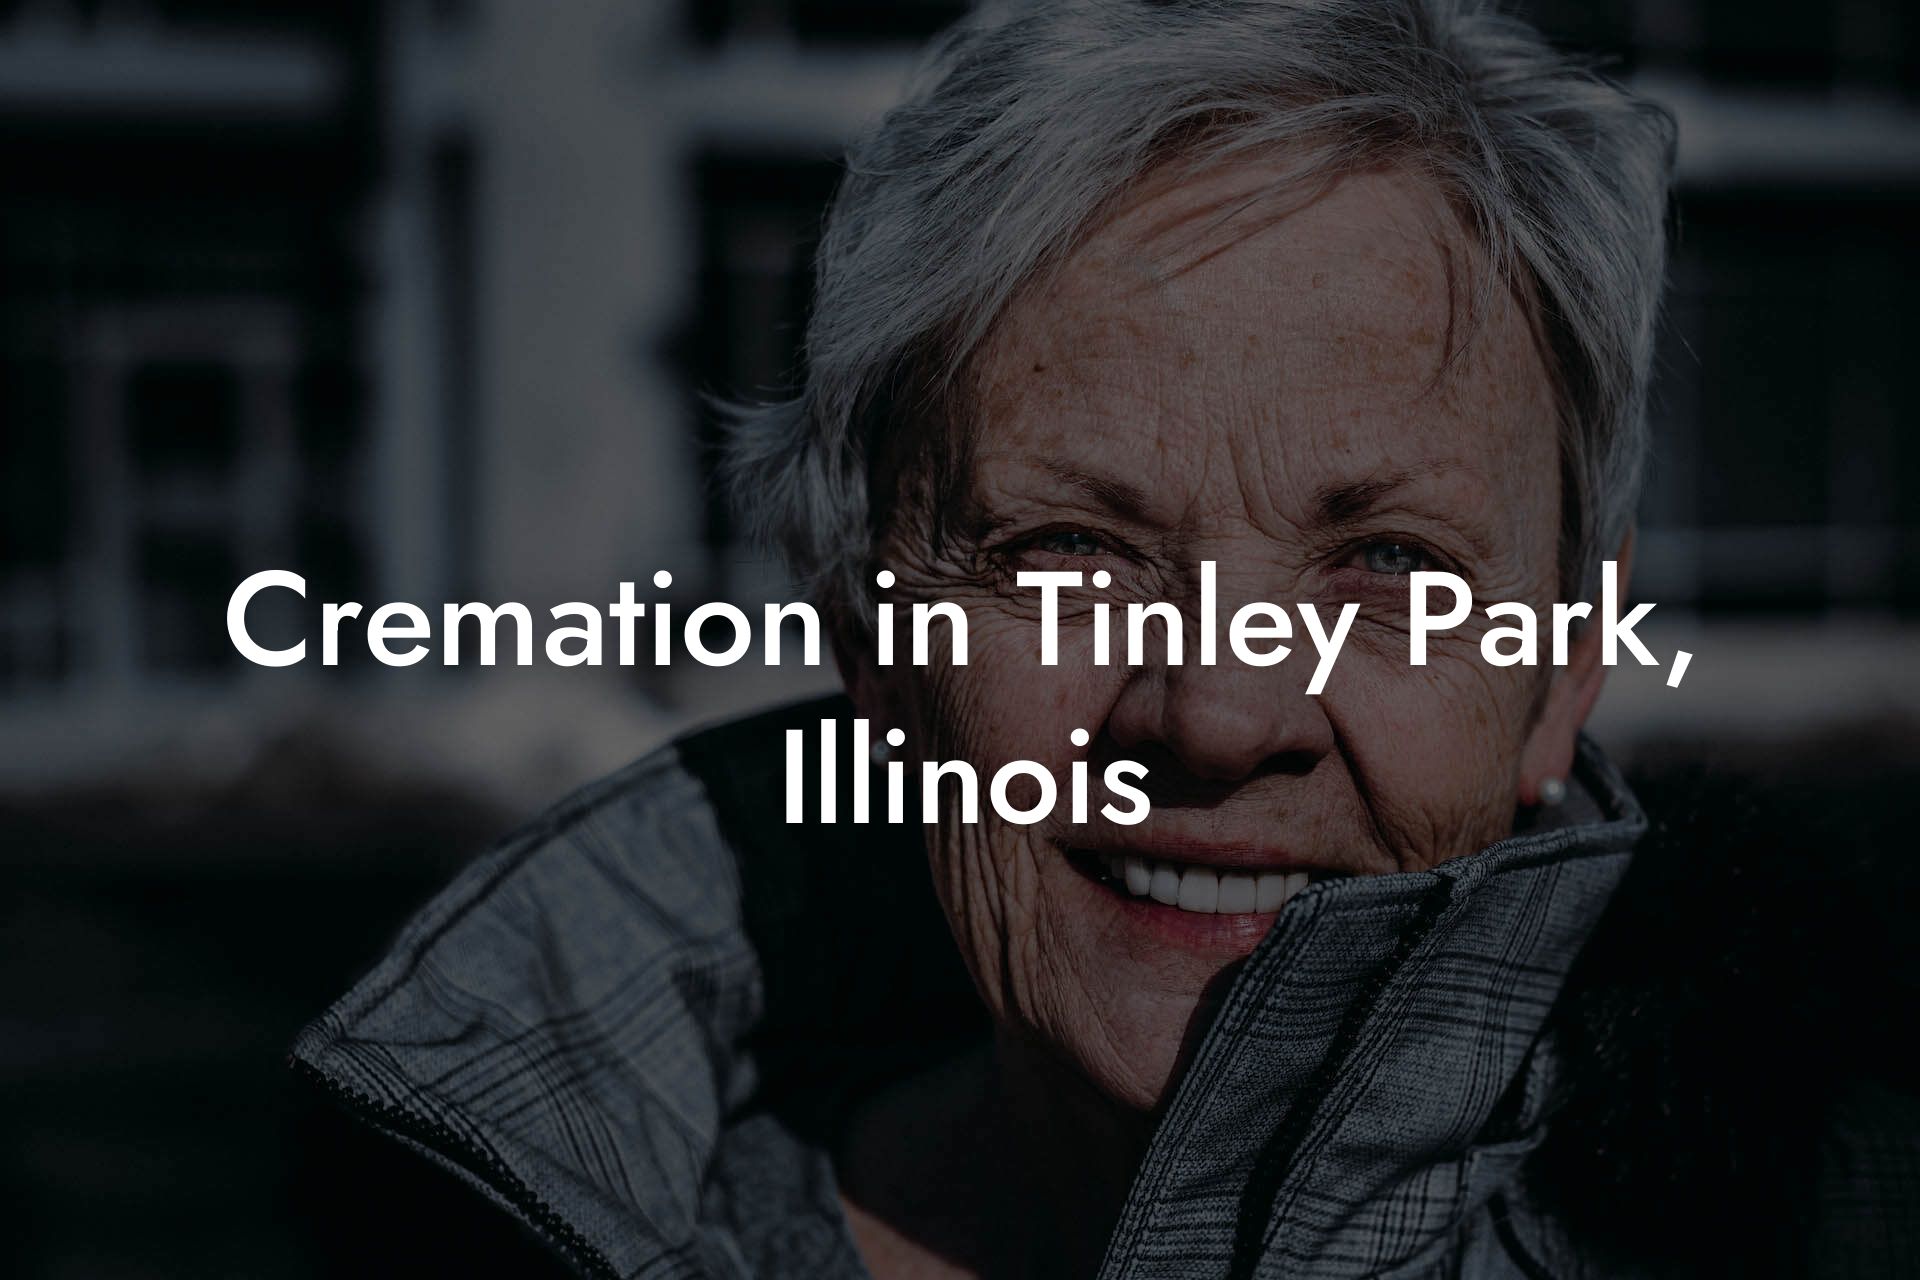 Cremation in Tinley Park, Illinois